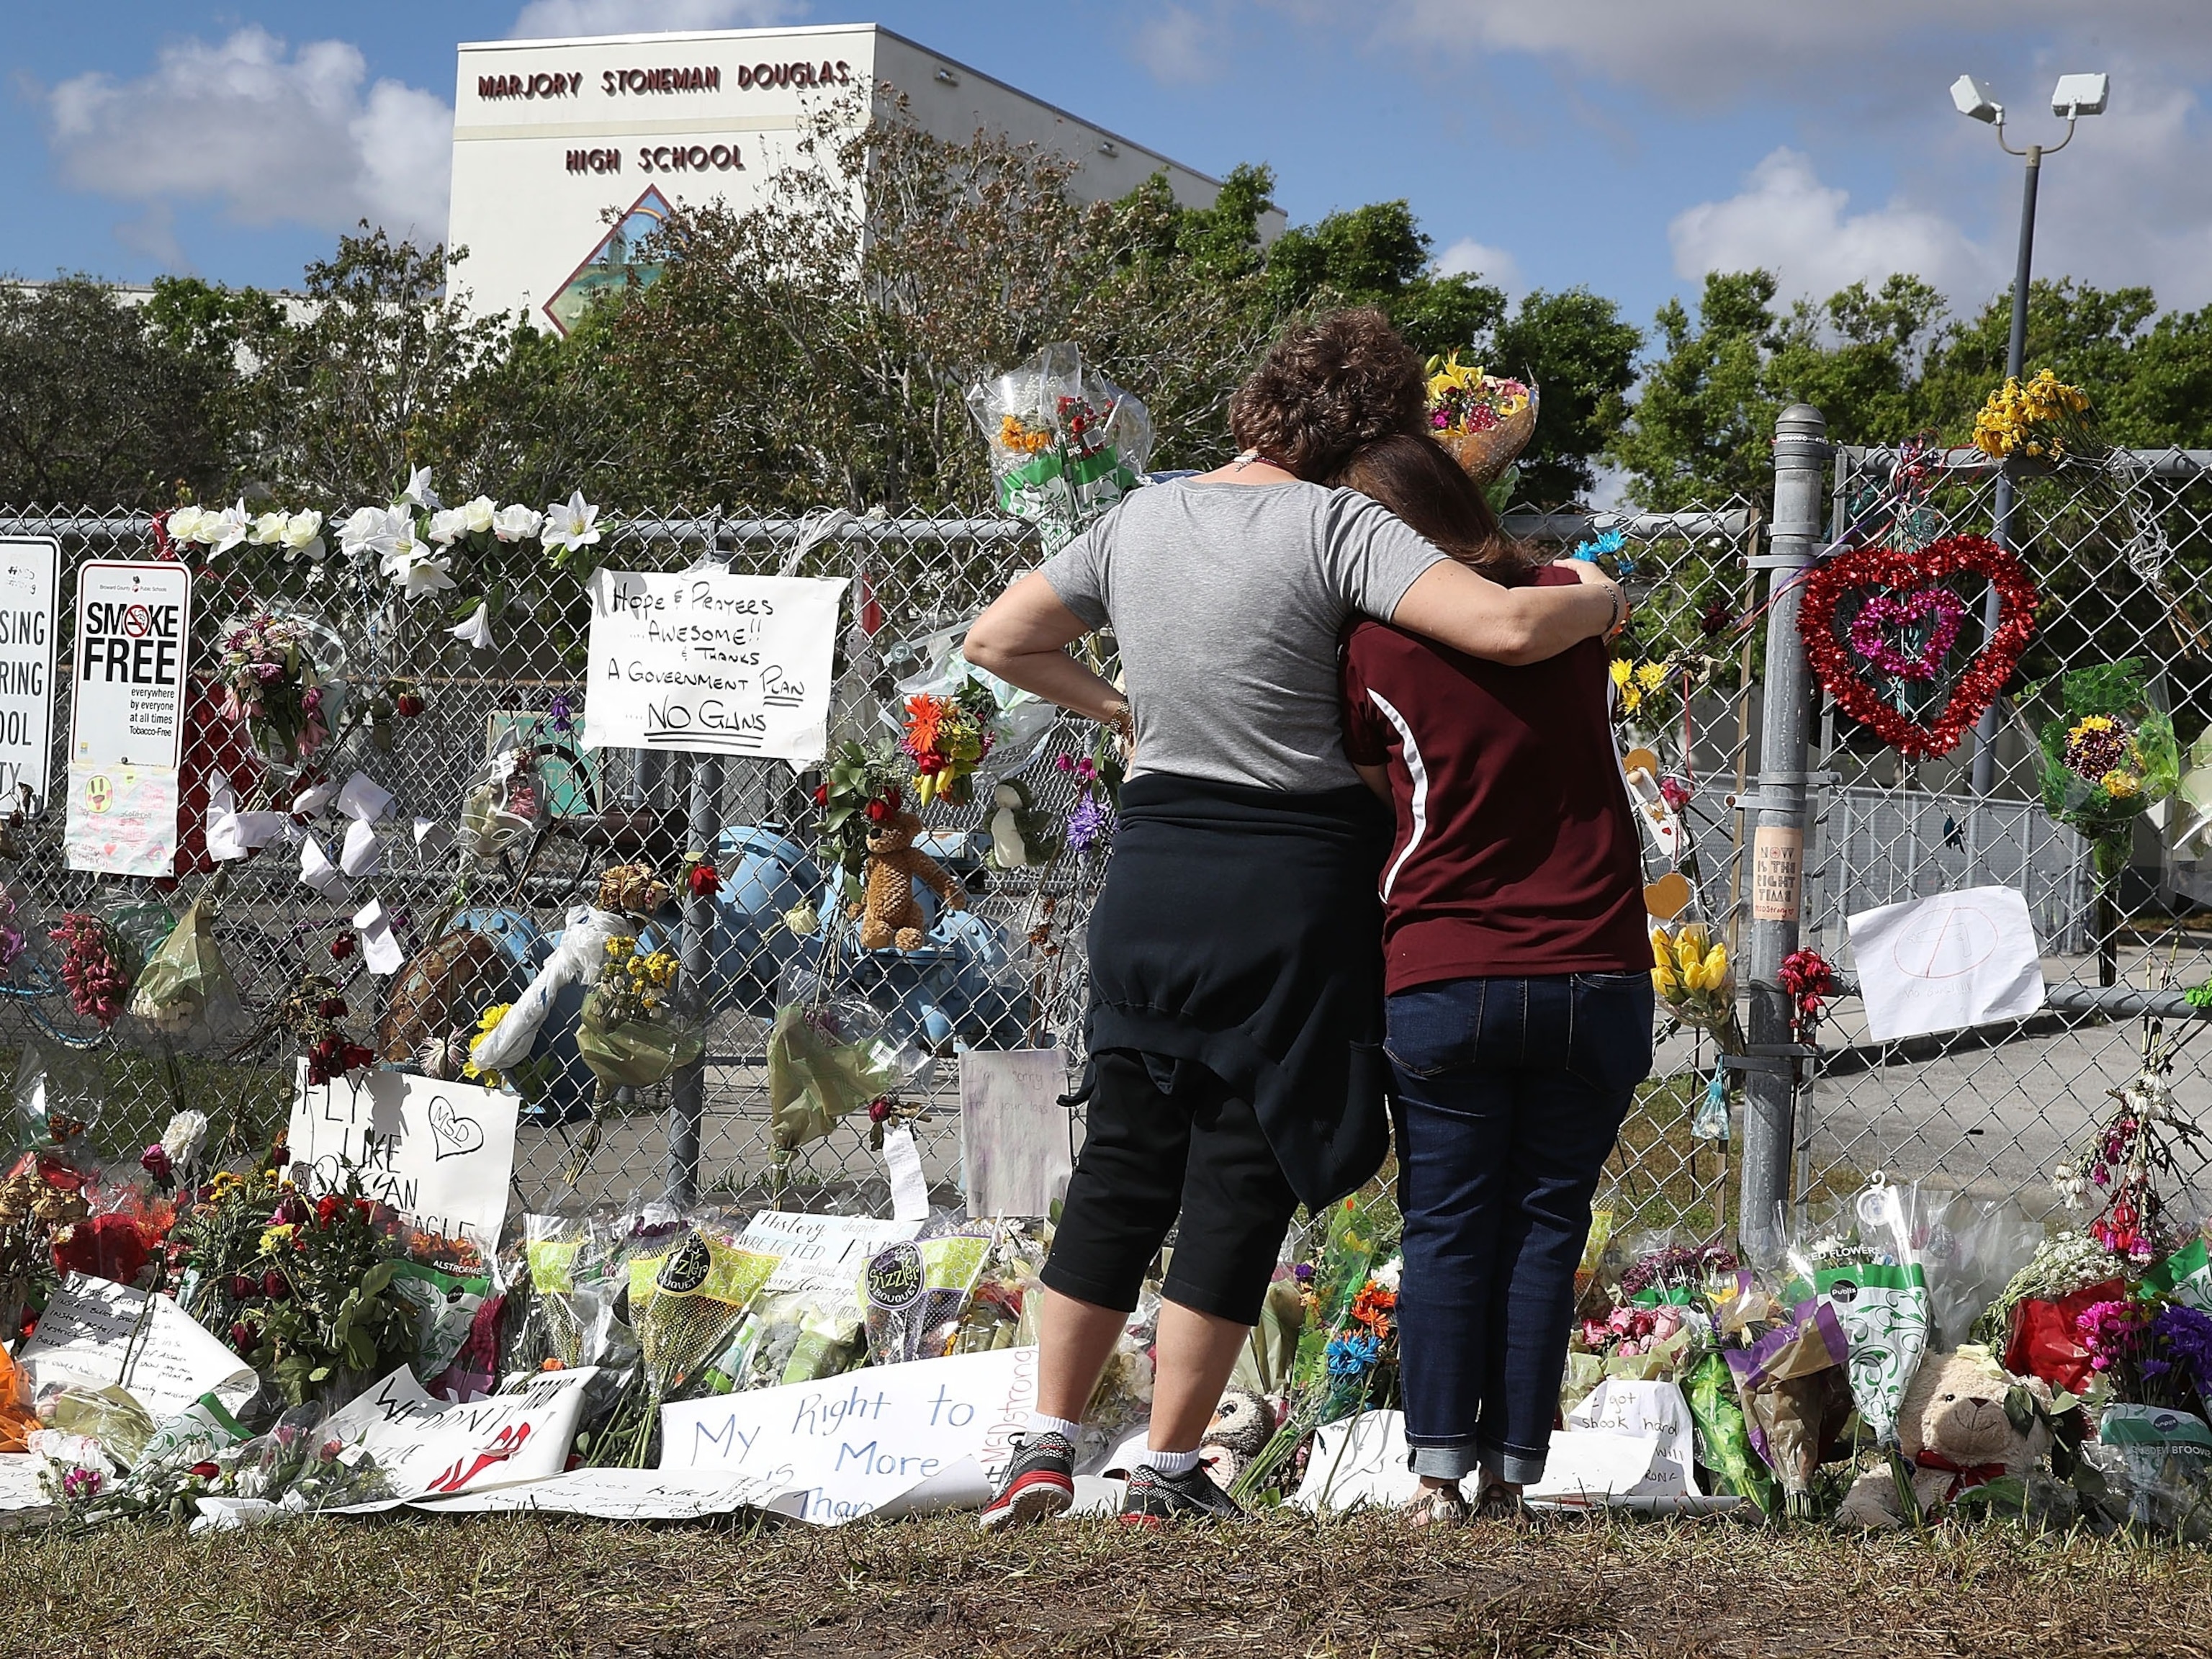 PHOTO: The memorial in front of Marjory Stoneman Douglas High School as teachers and staff are allowed to return to the school for the first time since the mass shooting on campus, Feb. 23, 2018, in Parkland, Fla.